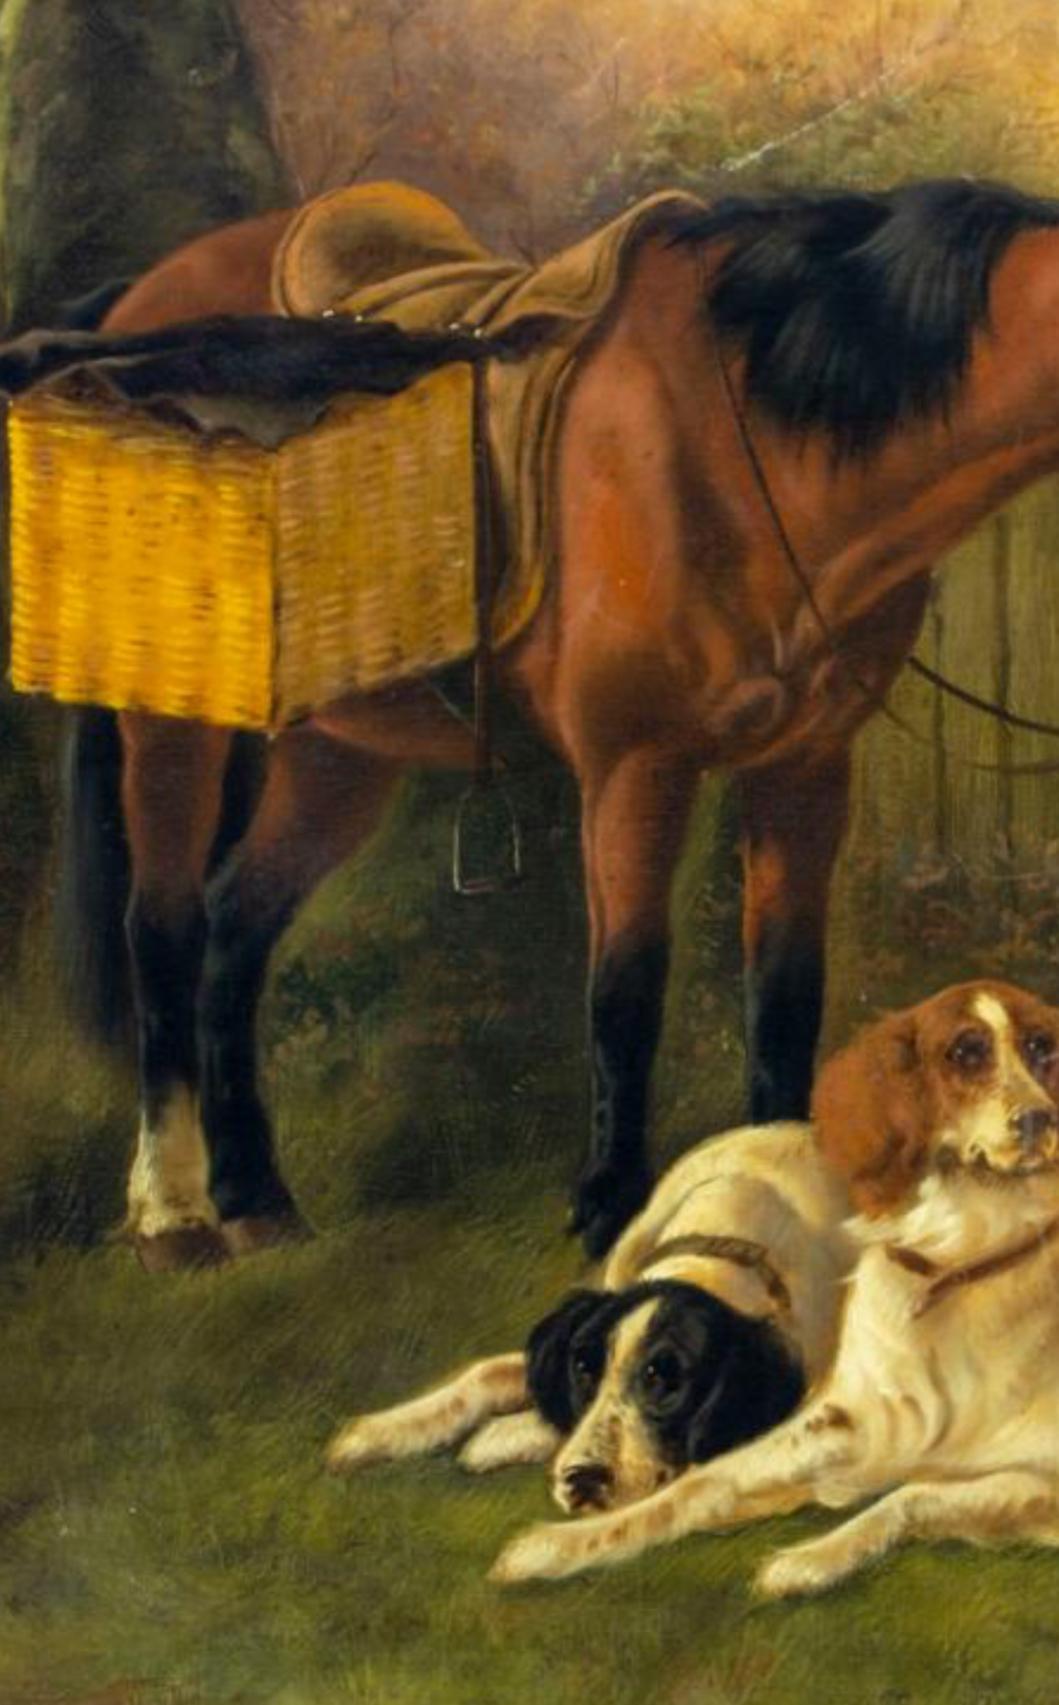 
Scottish/British artist John Gifford is best known for his paintings of Setters, Spaniels and Ponies in the Scottish countryside and highlands.  Sought after for his sporting artwork, Gifford’s work appears in art museums and galleries in the UK